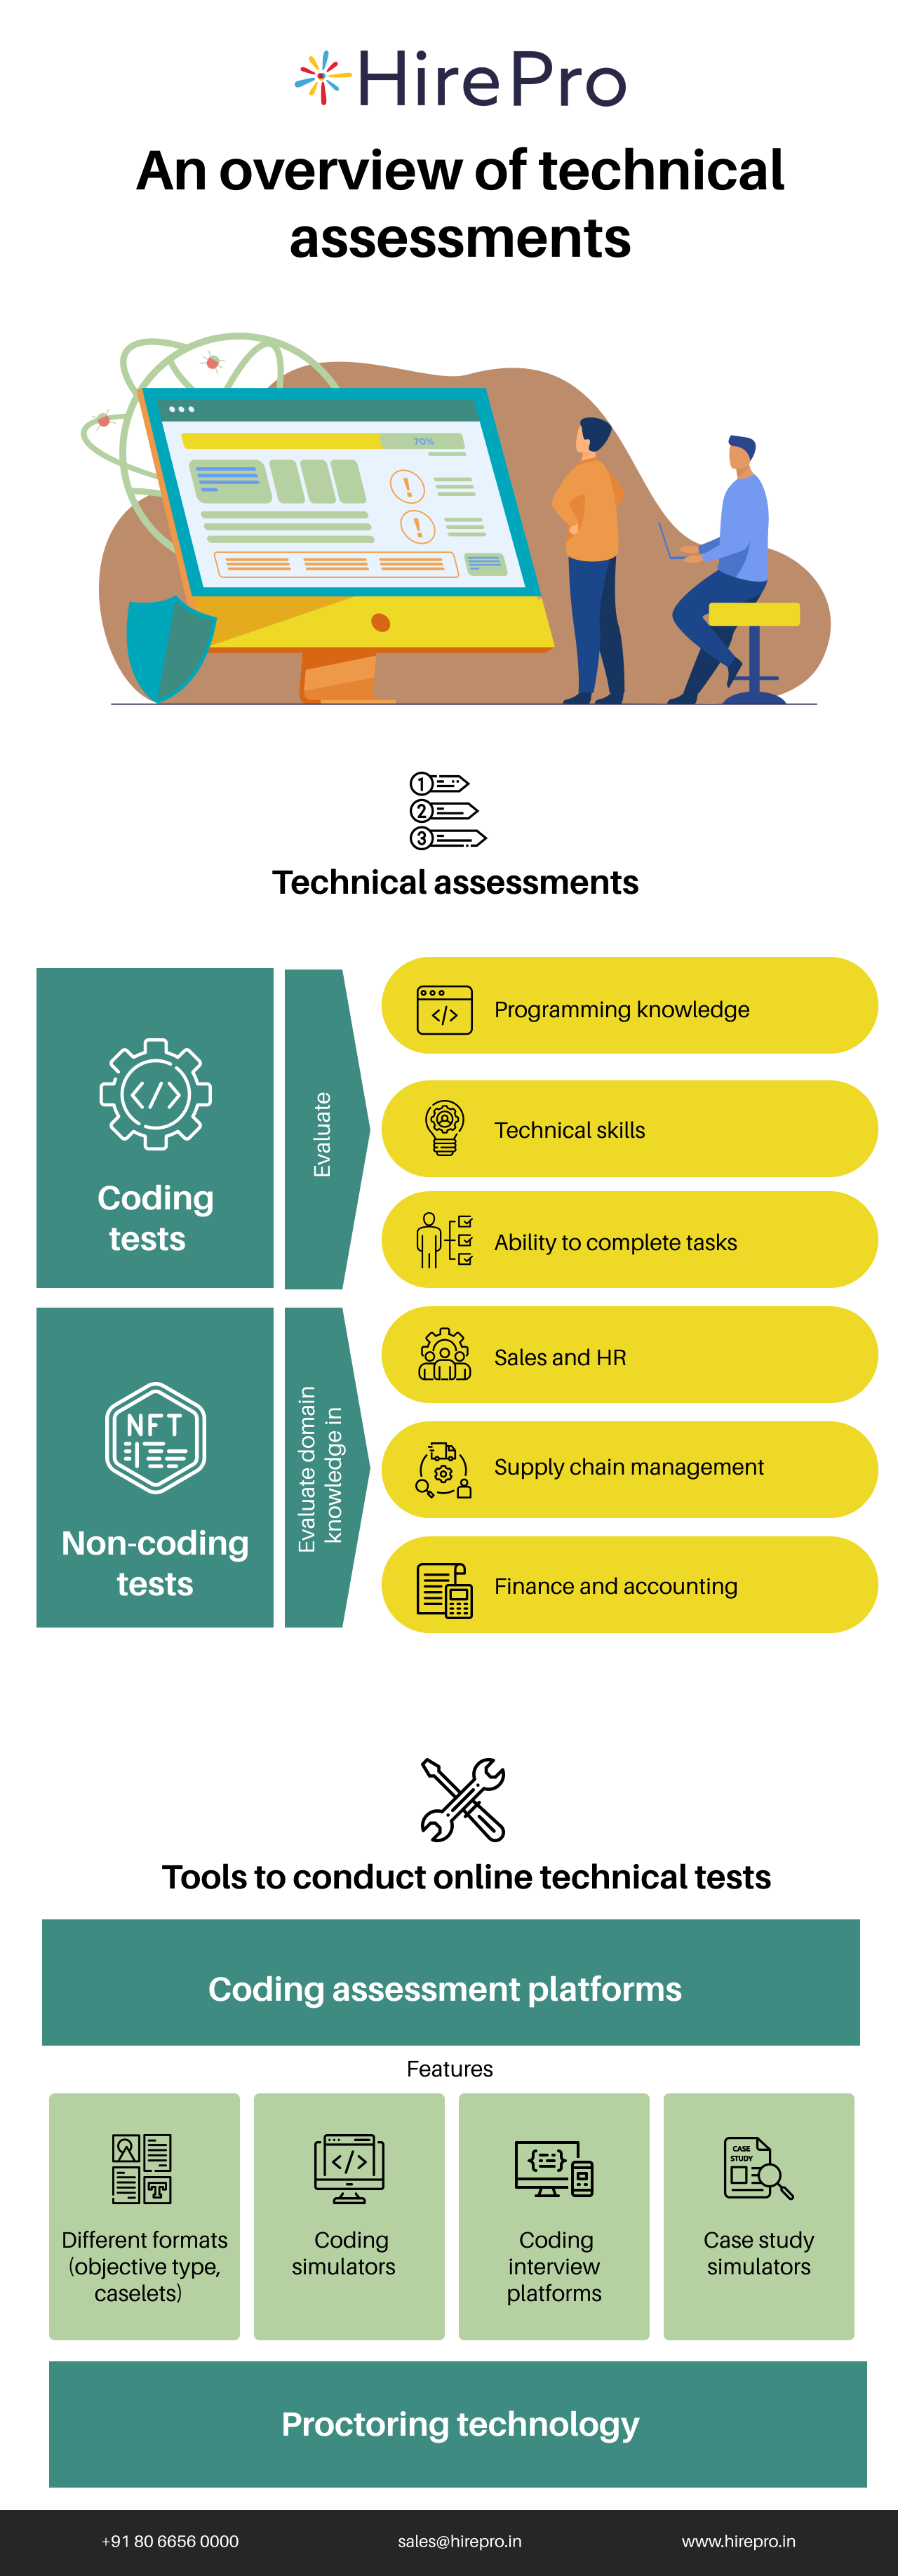 An overview of technical assessments